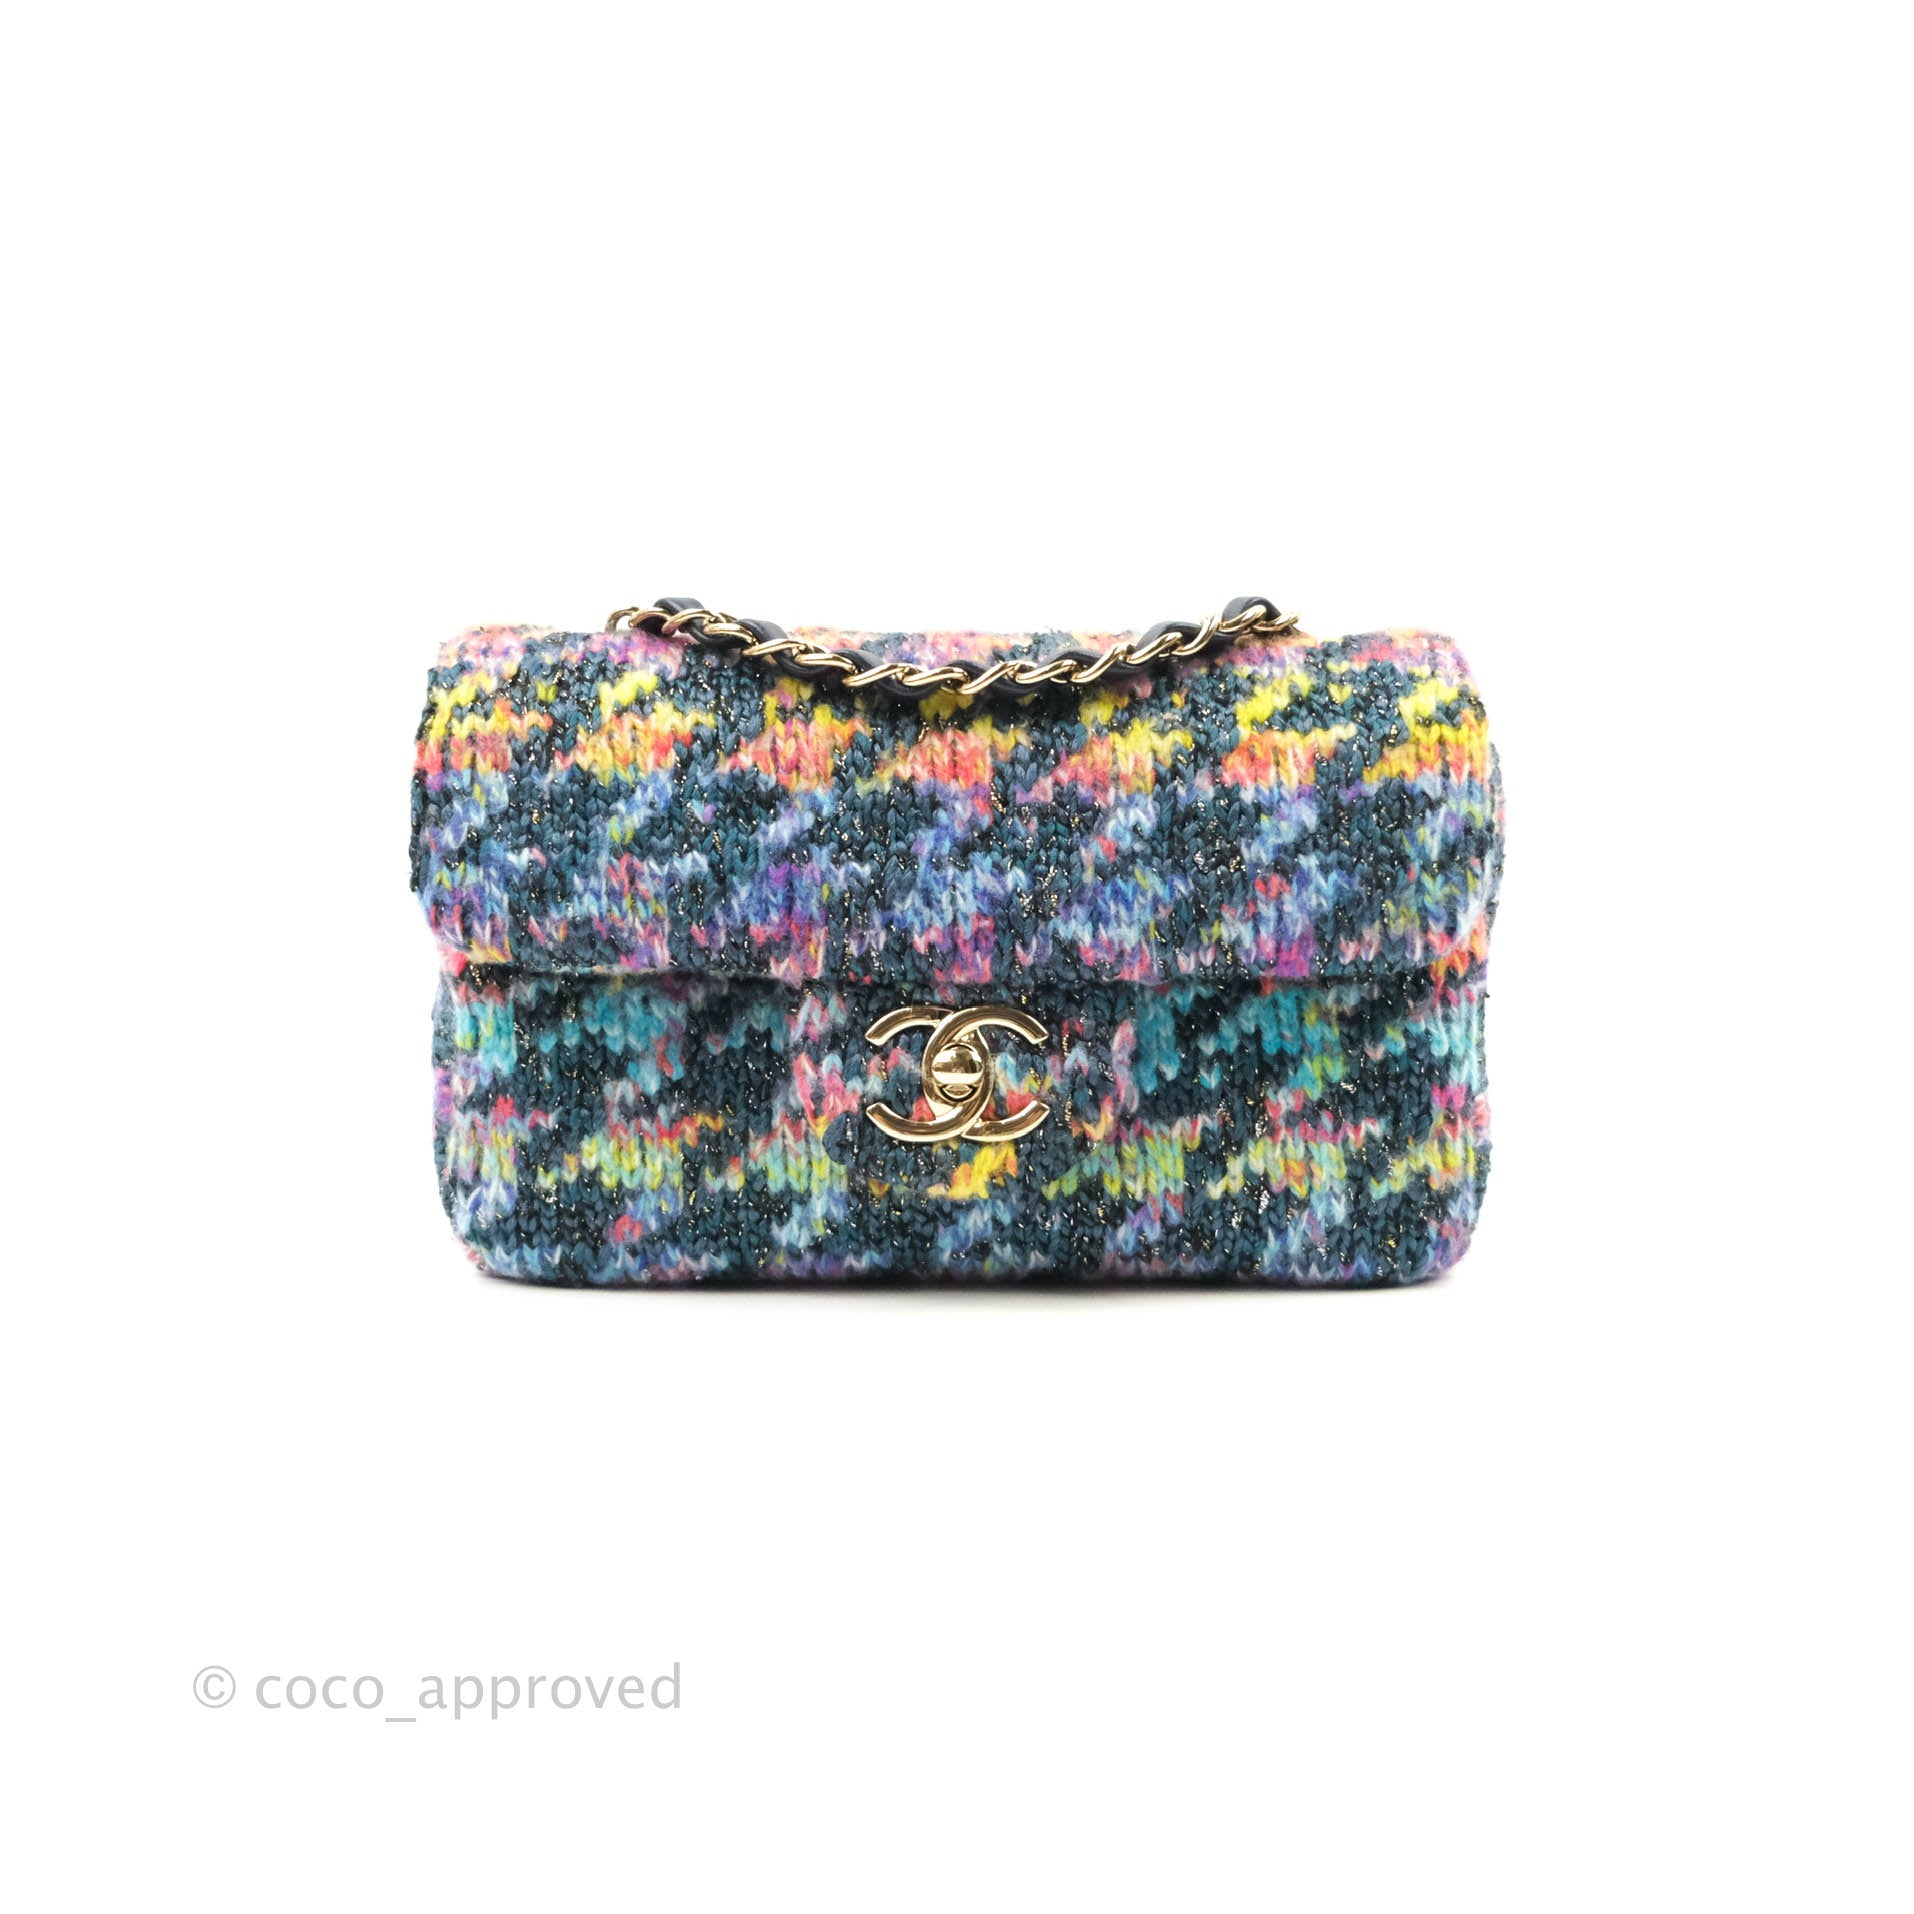 CHANEL 19 Small Flap Bag in Rainbow Houndstooth Tweed